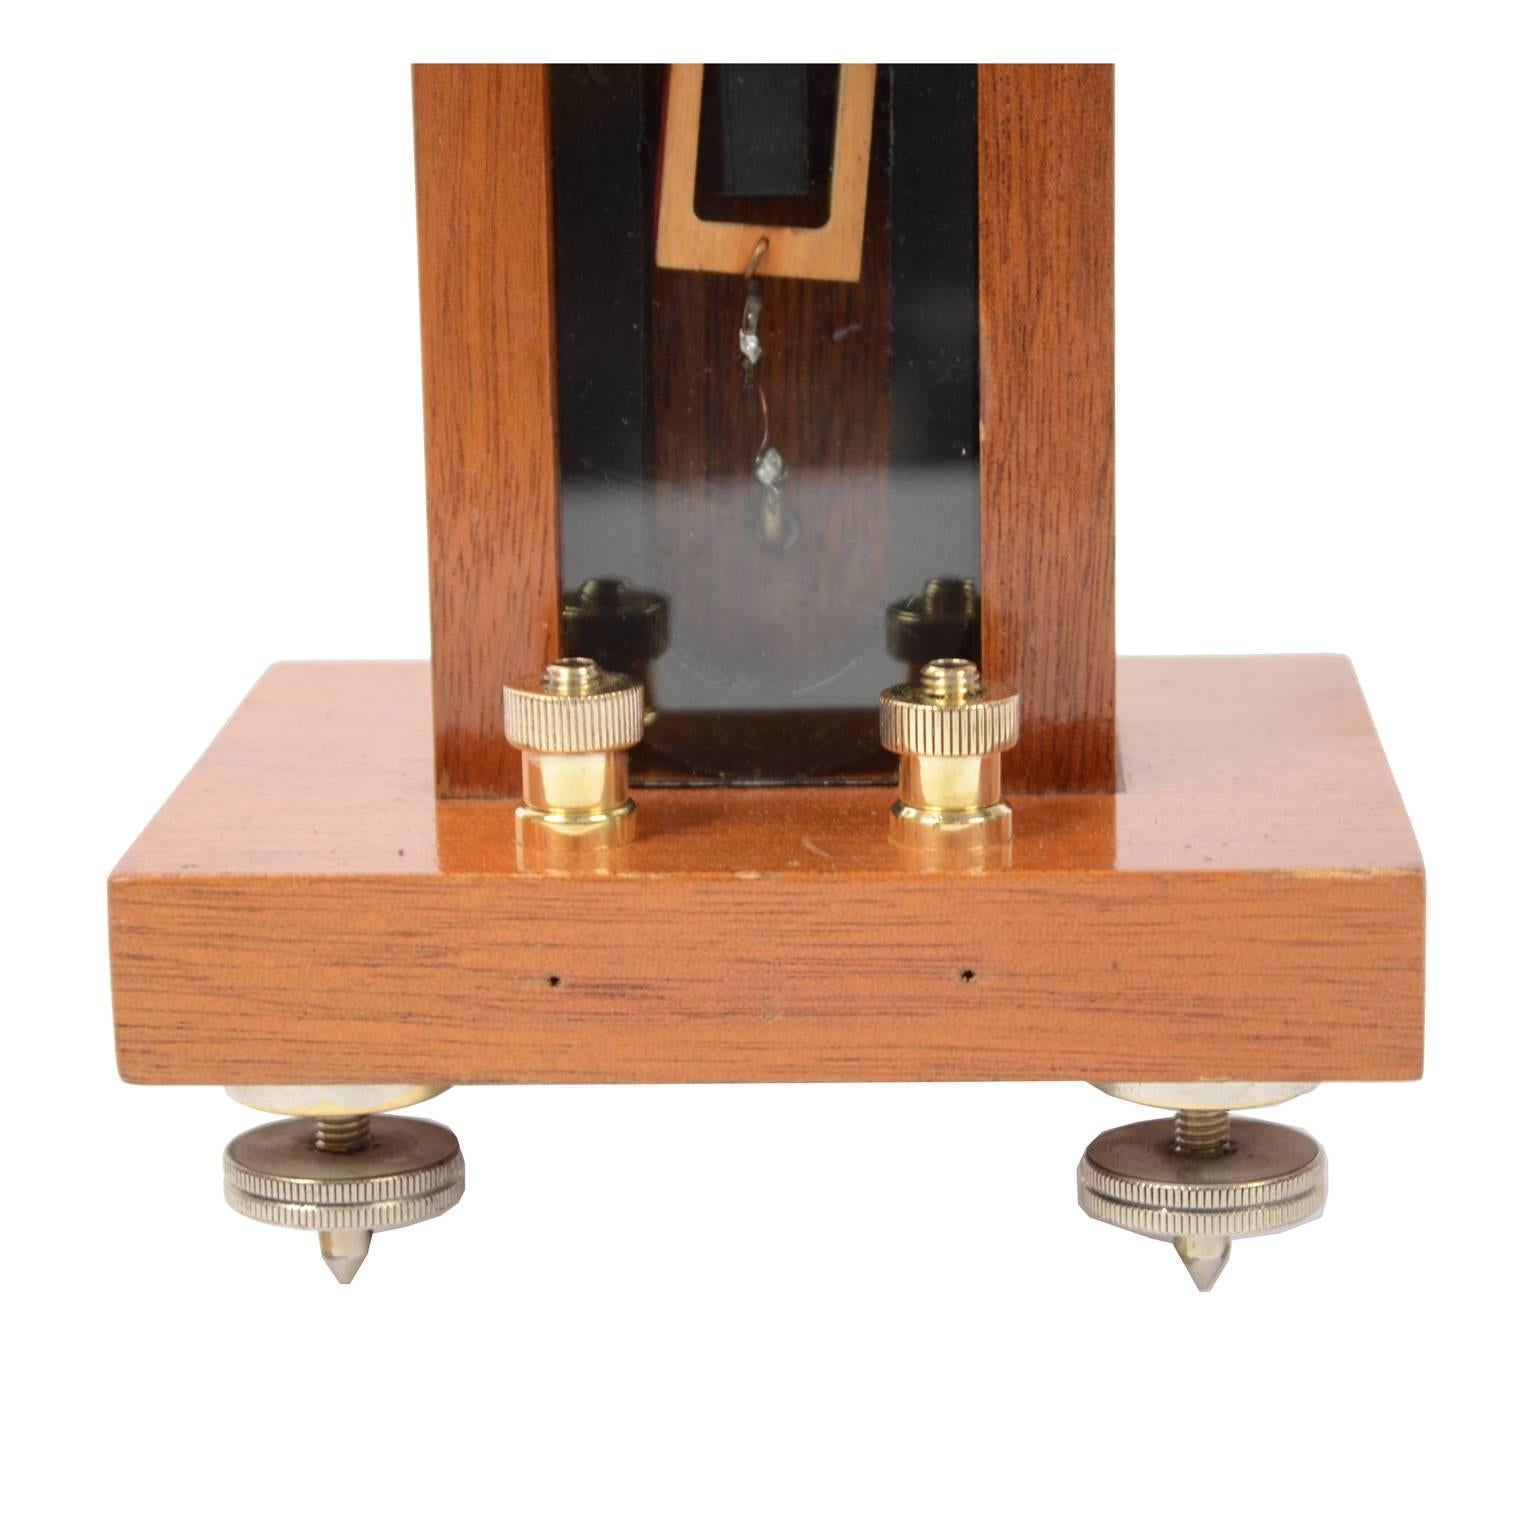 Wood Galvanometer Antique Measuring Instrument Used for Telegraph Cables 1850 circa For Sale